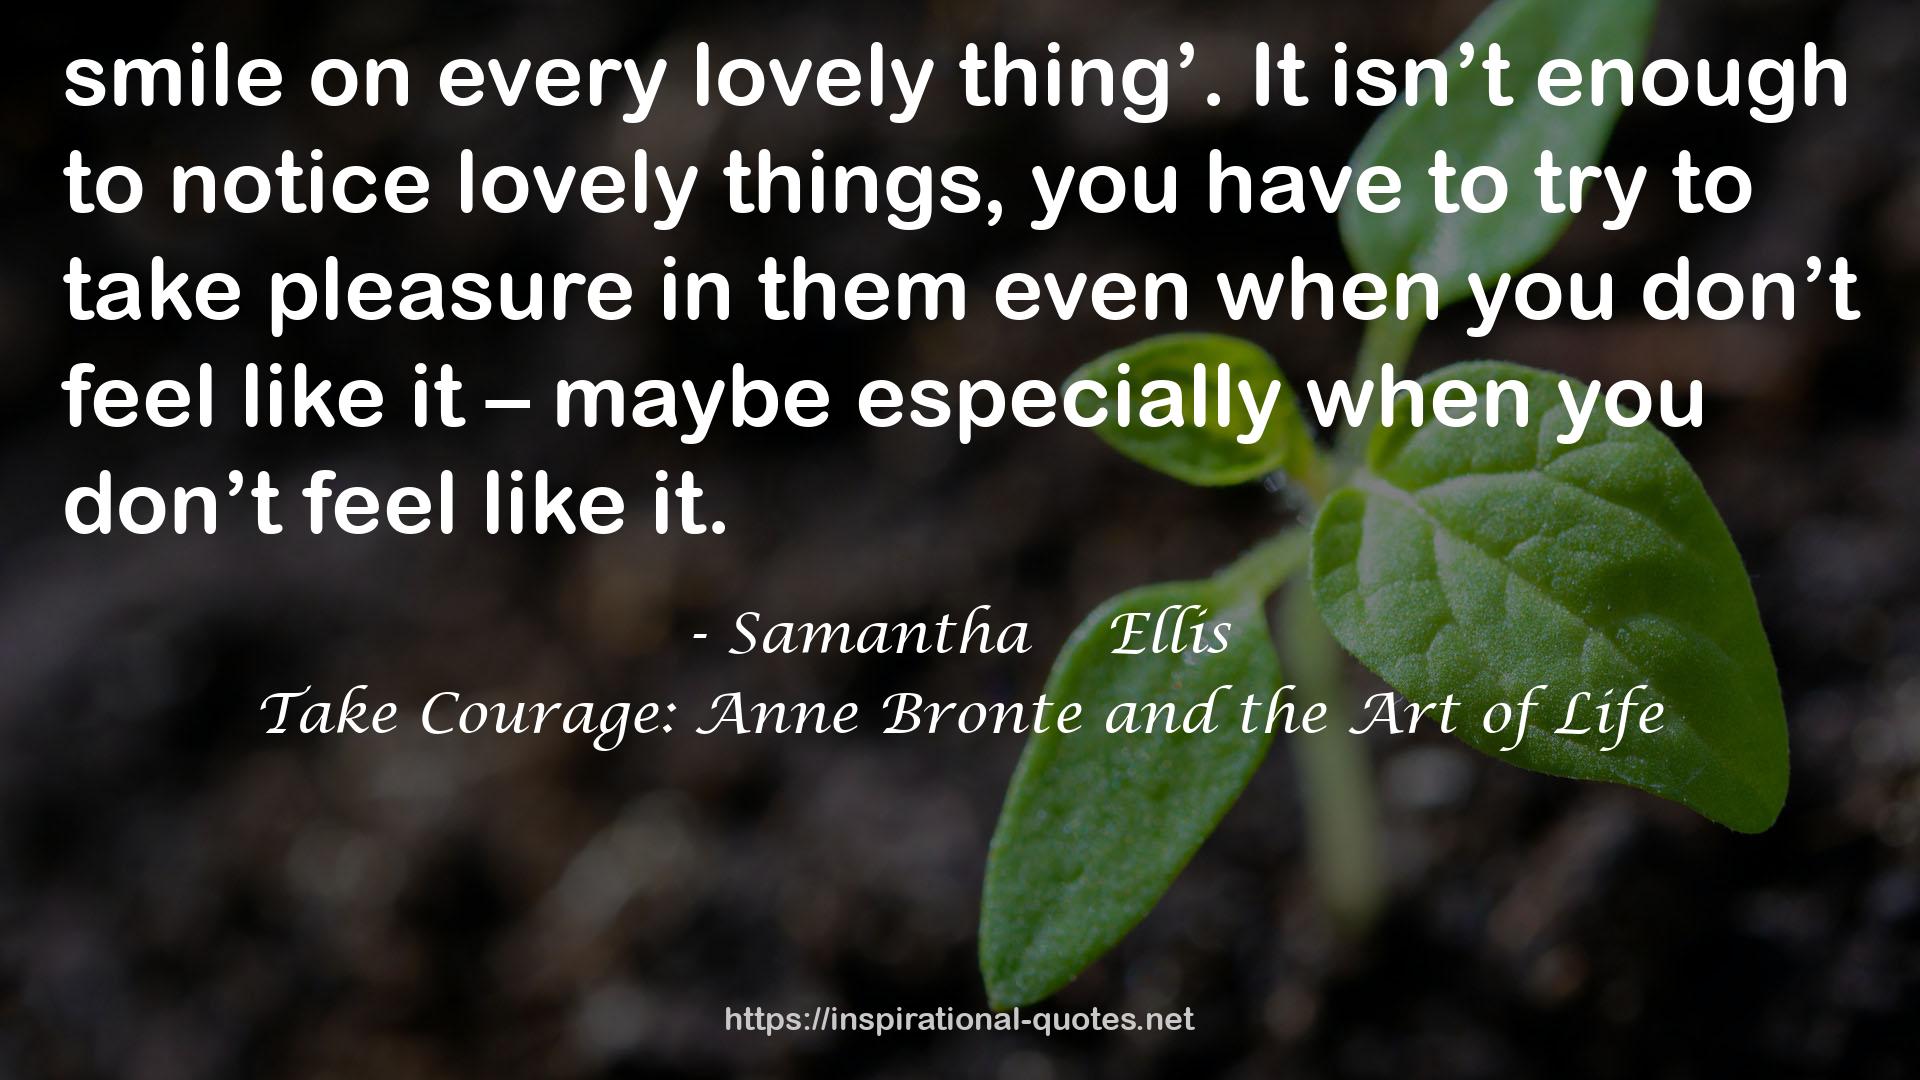 Take Courage: Anne Bronte and the Art of Life QUOTES